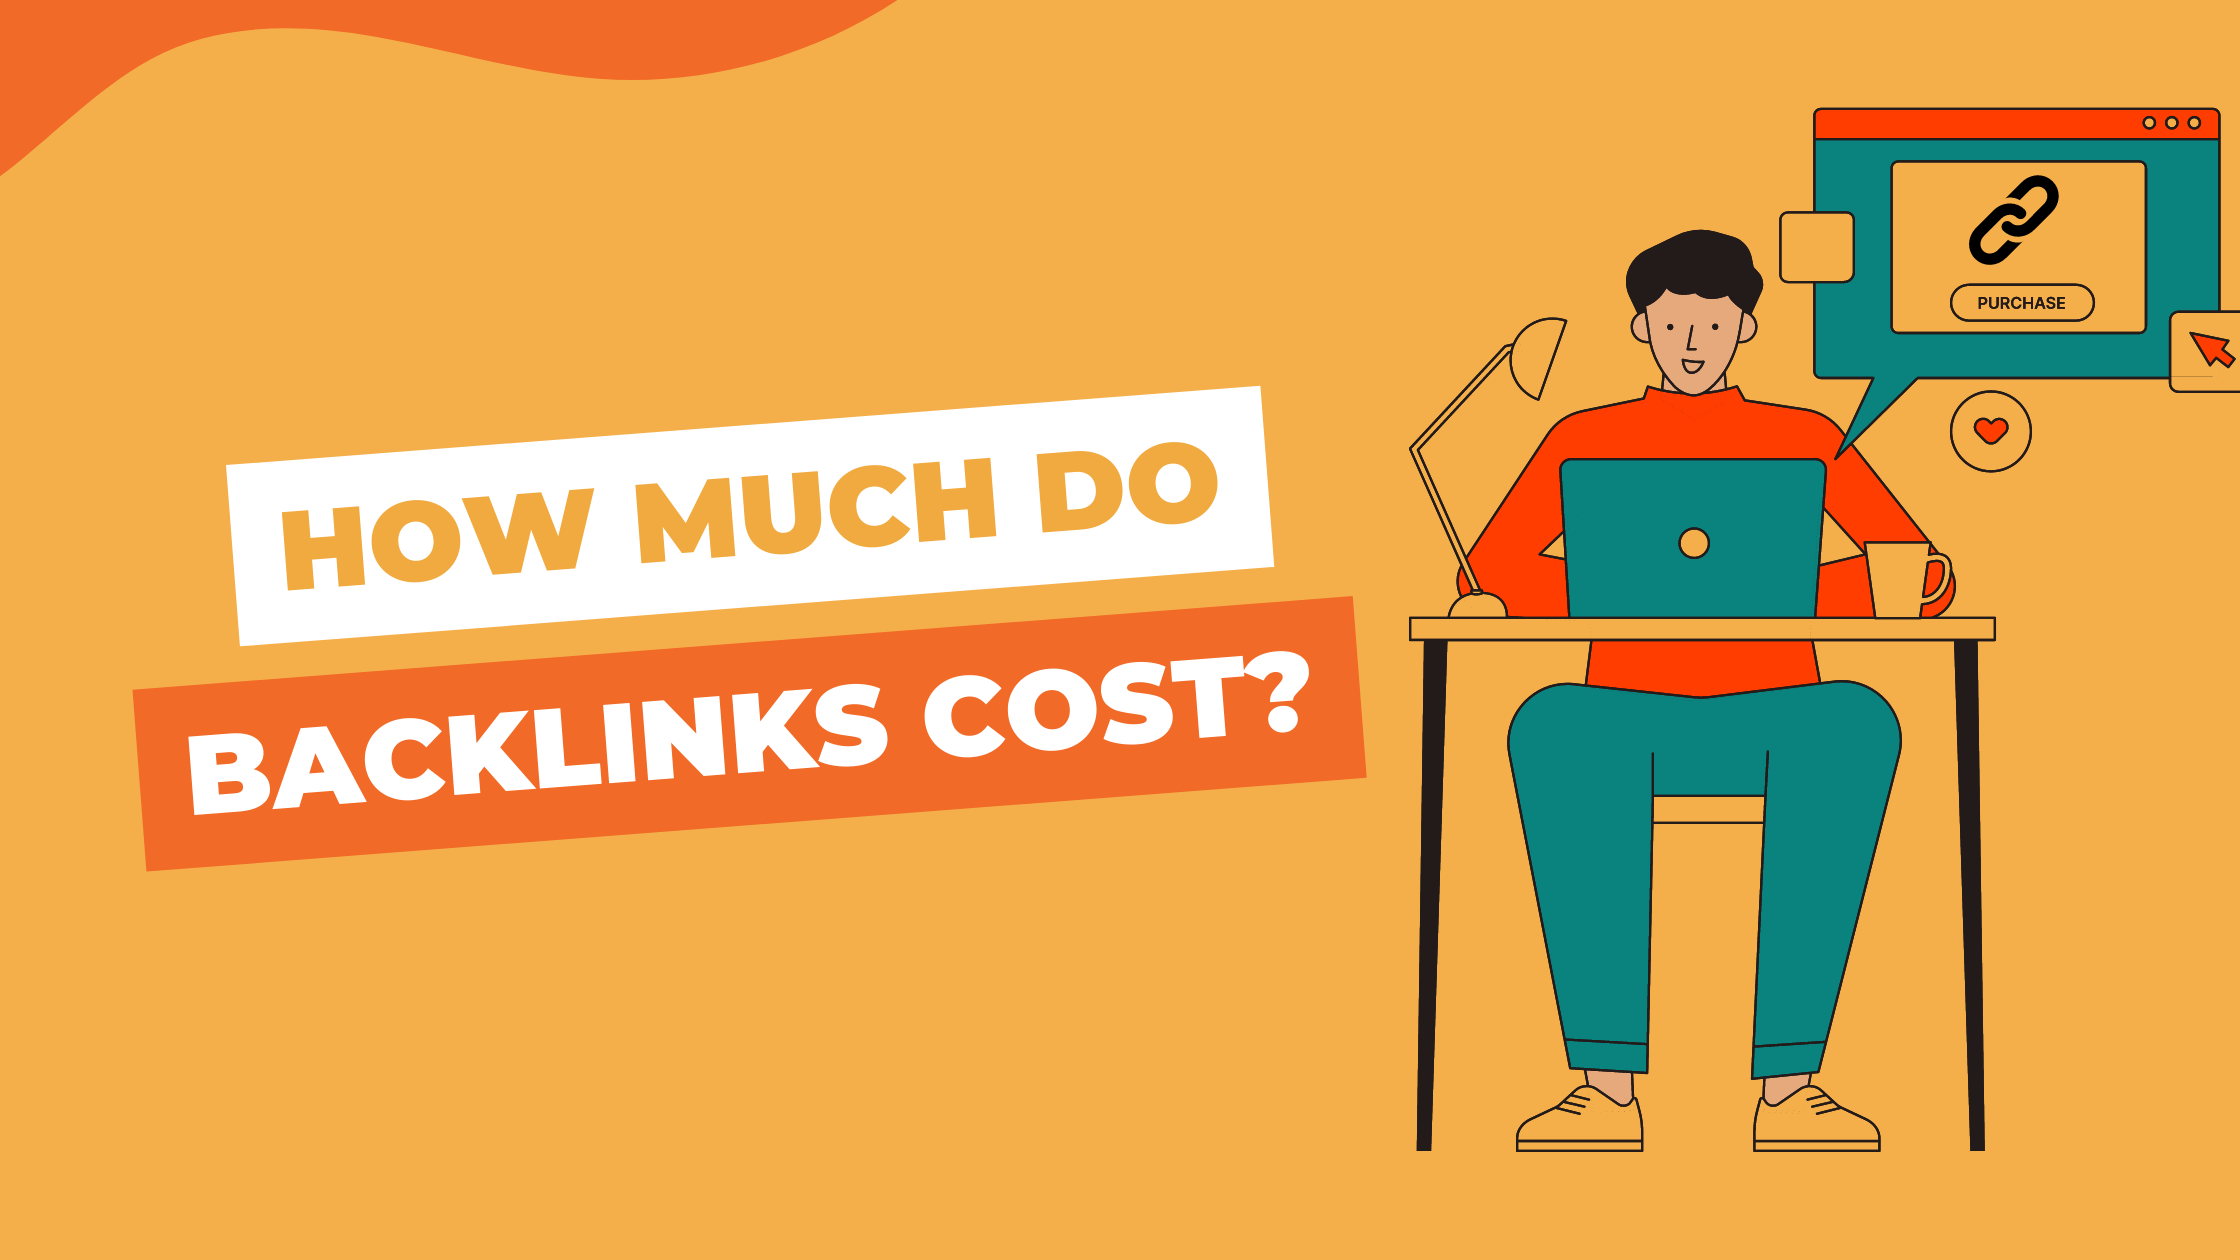 How much do backlinks cost?